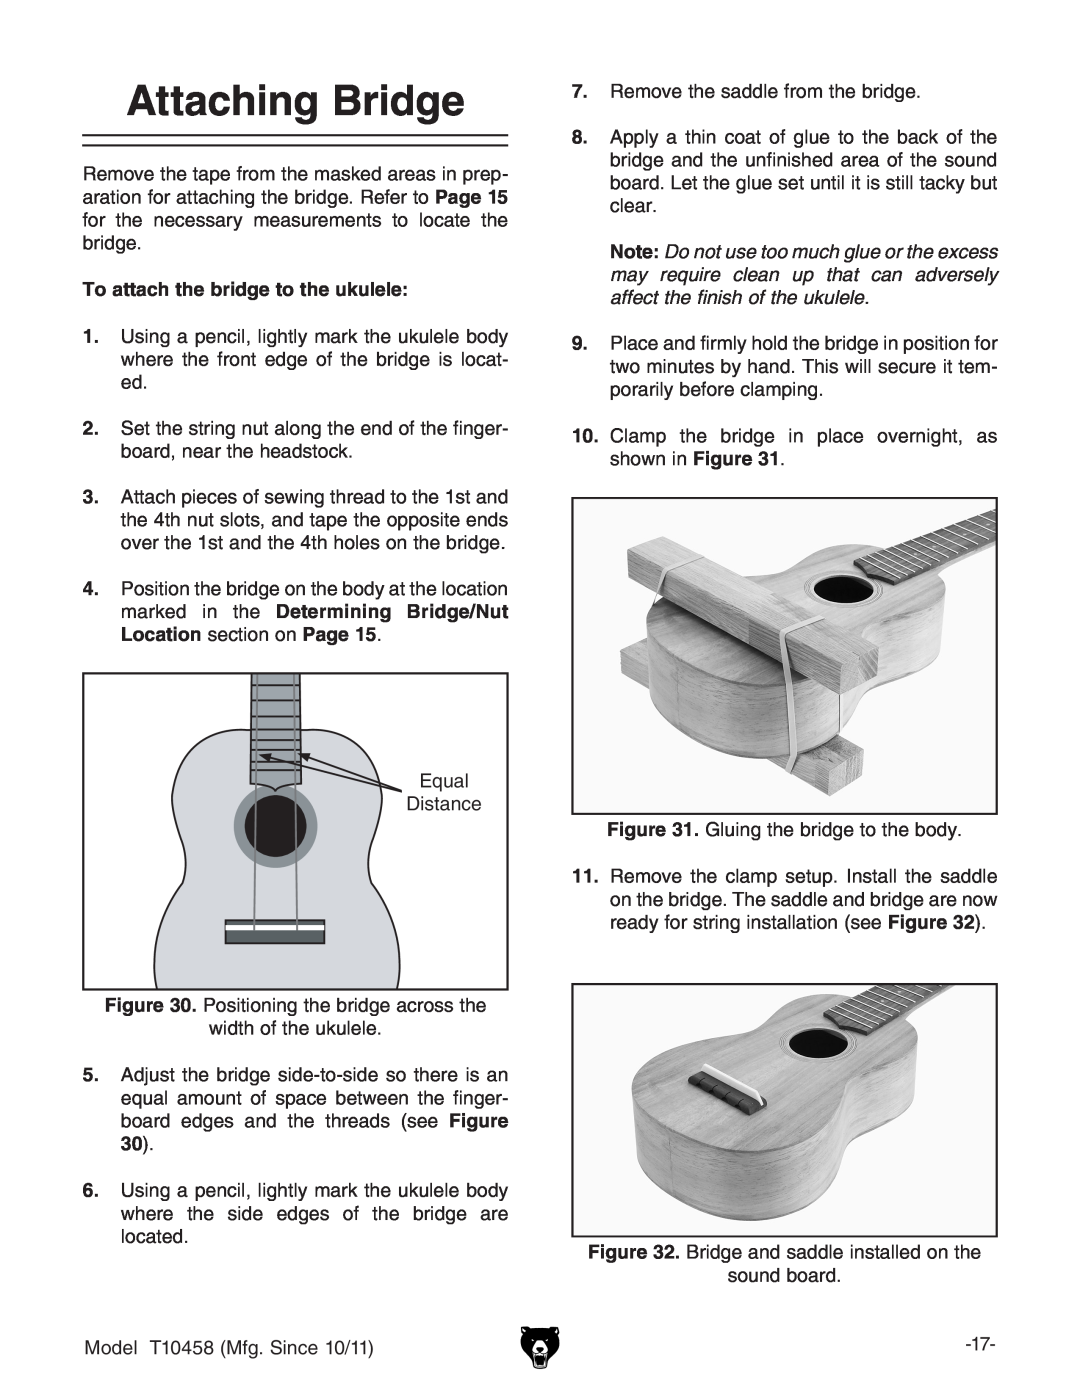 Grizzly T10458 instruction manual Attaching Bridge, To attach the bridge to the ukulele 